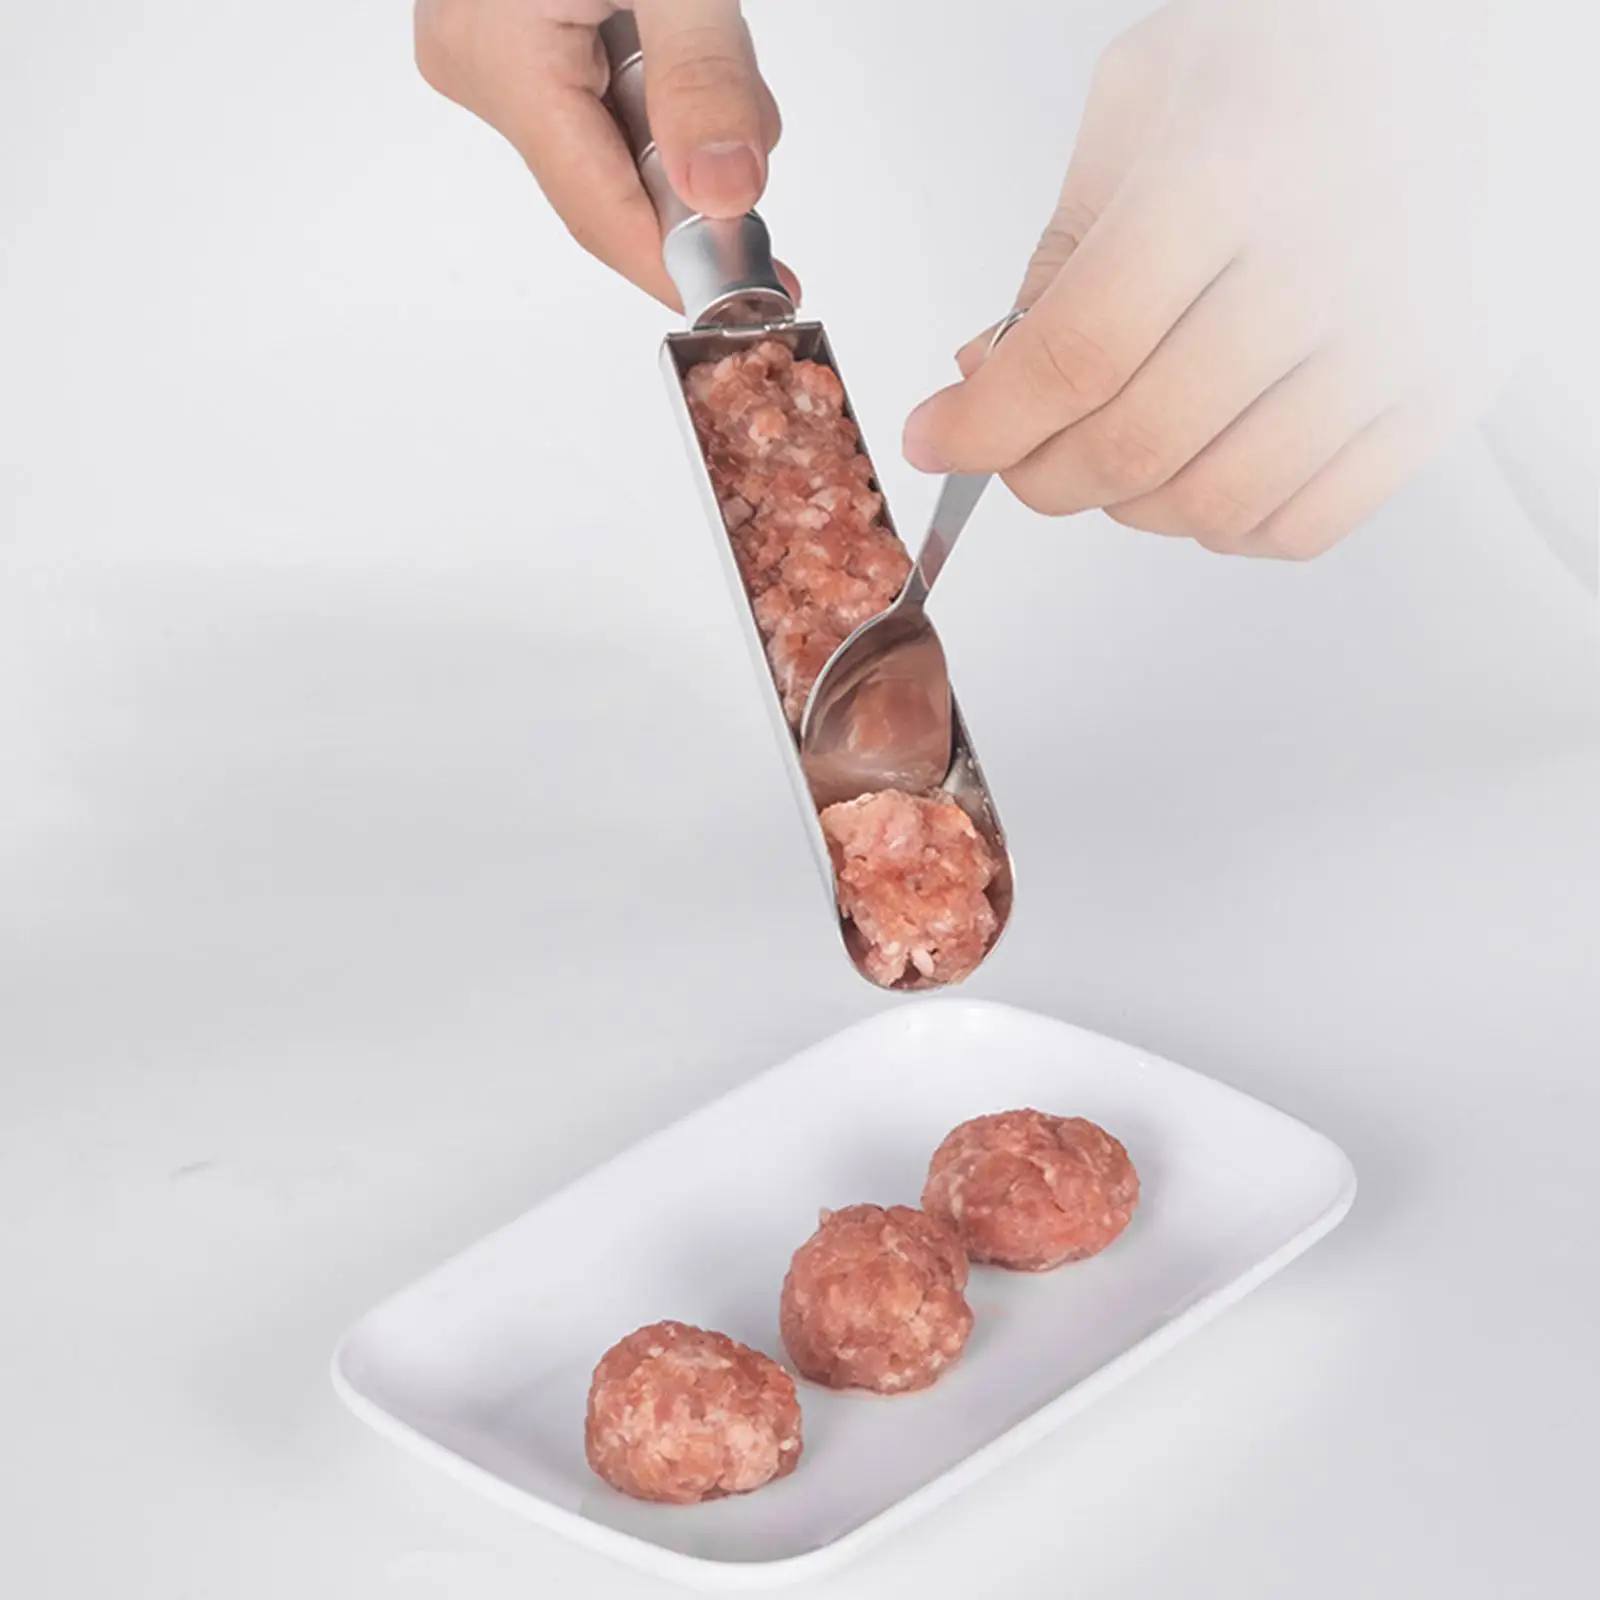 Kitchen Meatball Maker Portable Meat Baller Spoon with Spade DIY Meatball Making for Cooking Fish Ball Rice Balls Kitchen Cookie